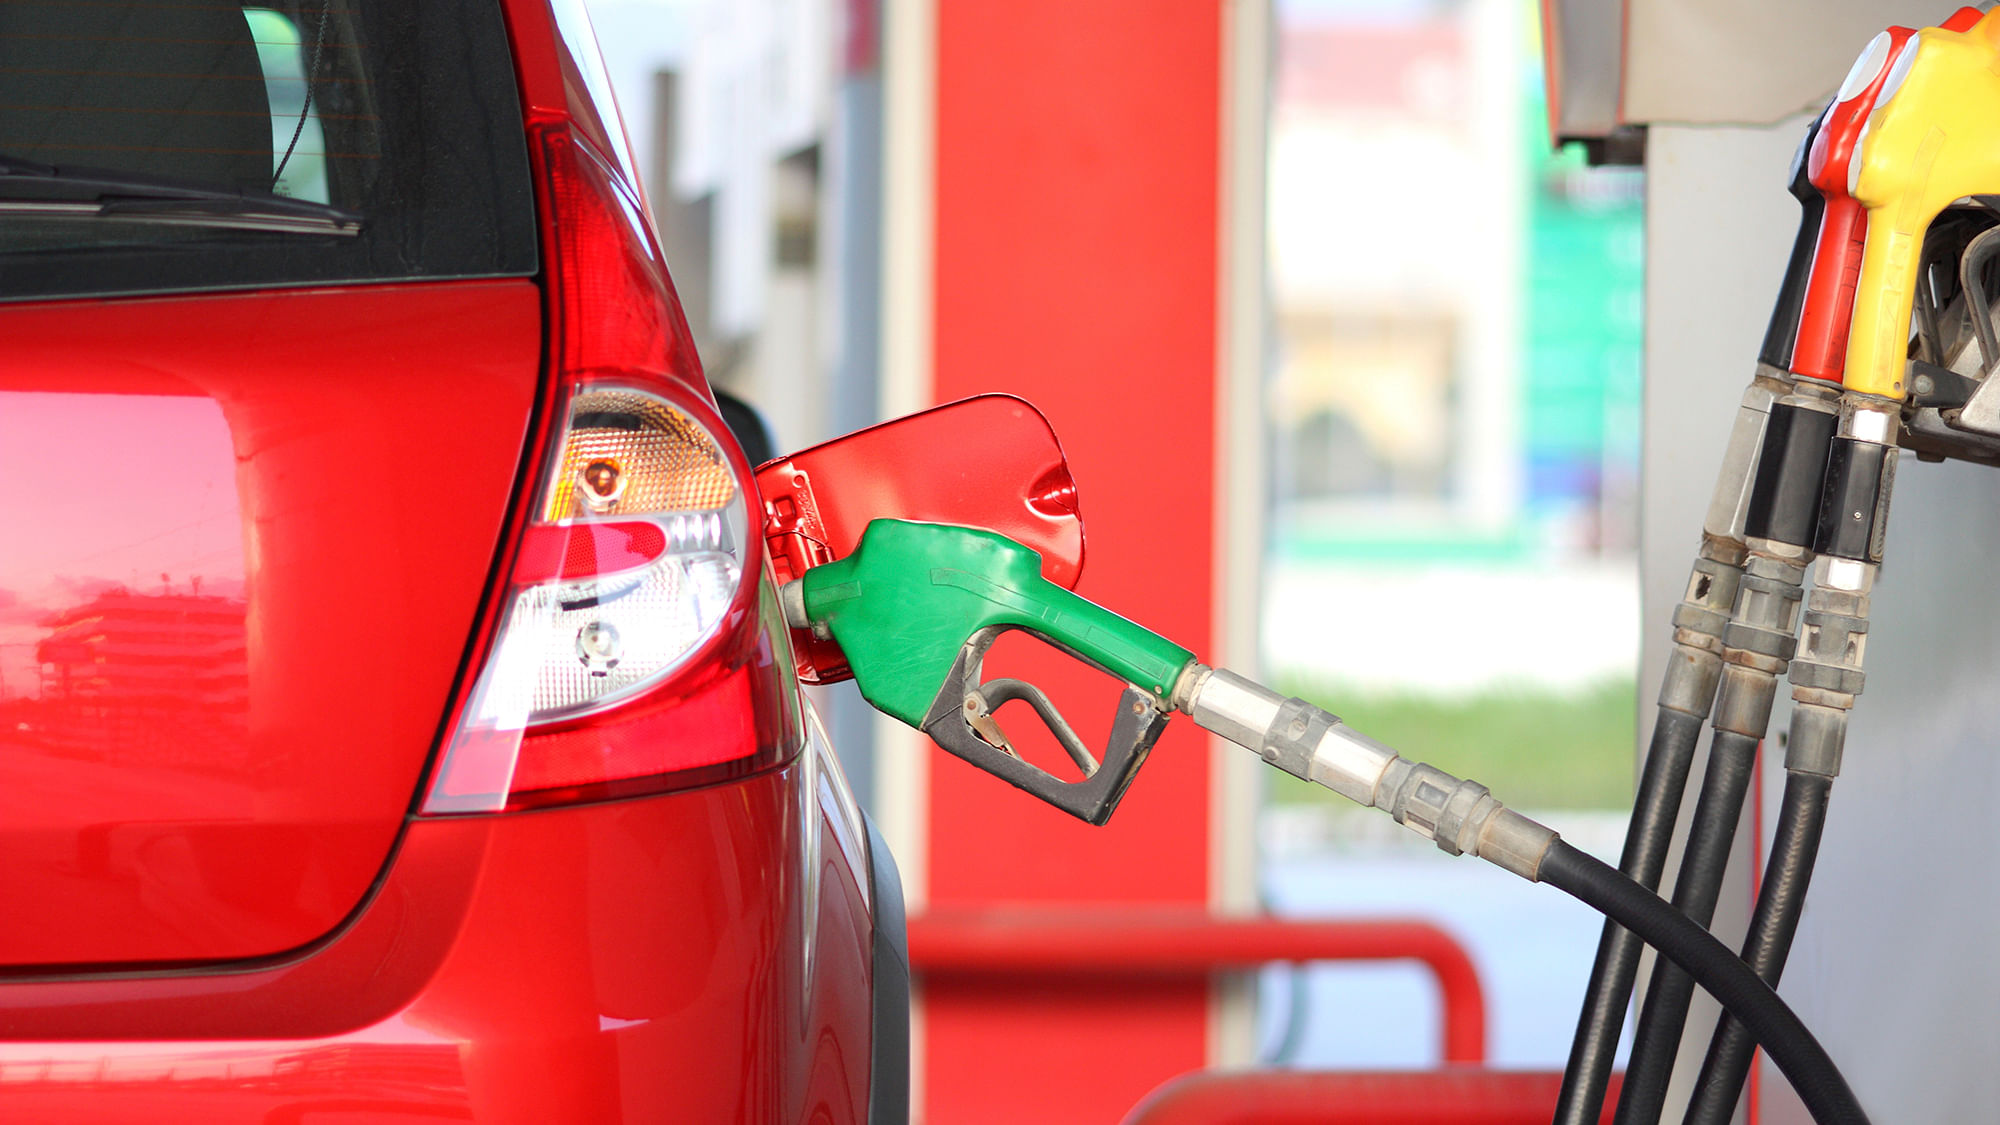 Petrol in Delhi now costs Rs 80.05 a litre and diesel is priced at Rs 74.05 per litre